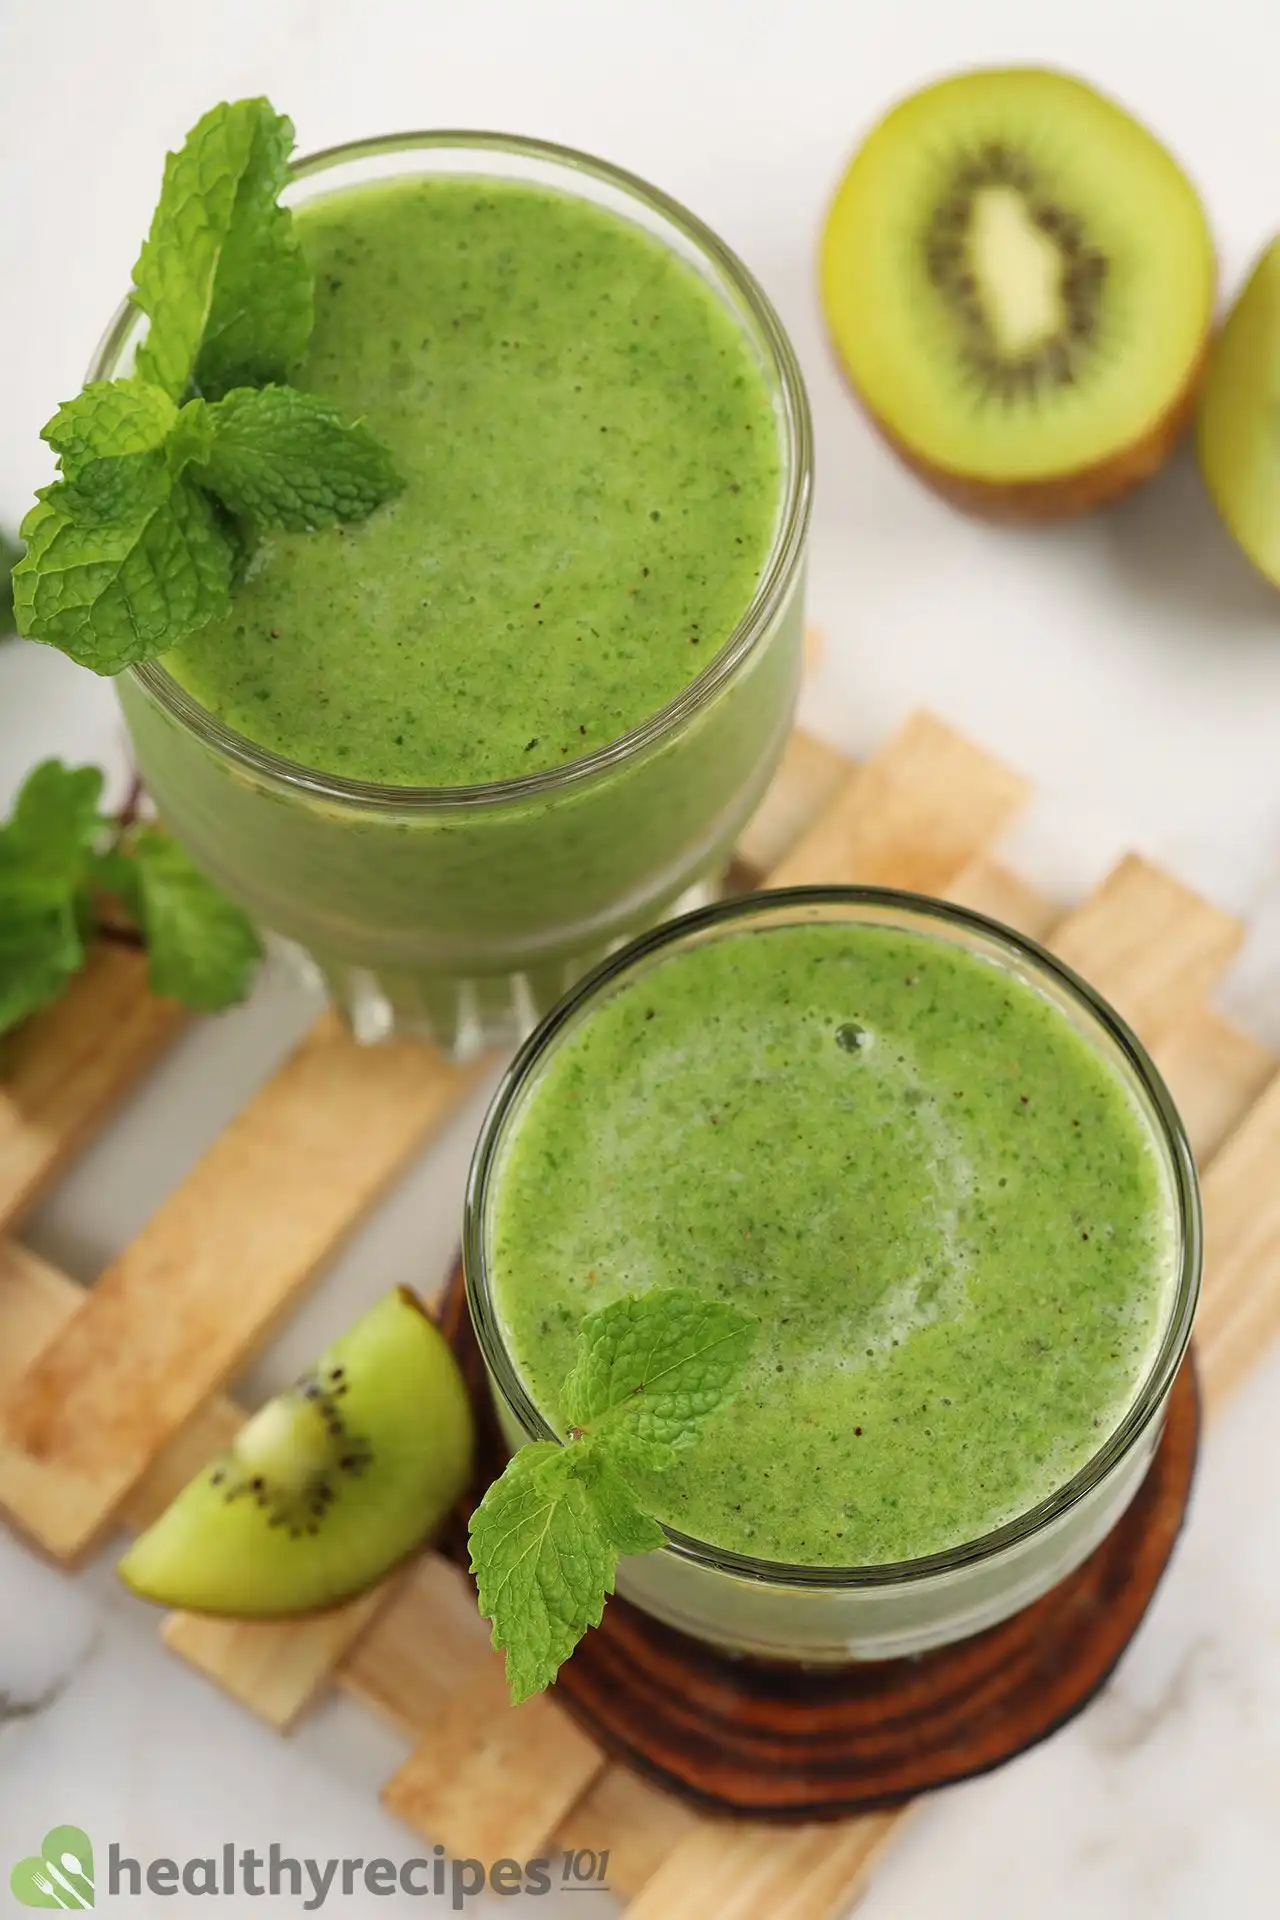 Apple Kiwi Kale Smoothie Recipe: A Quick and Healthy Refreshment